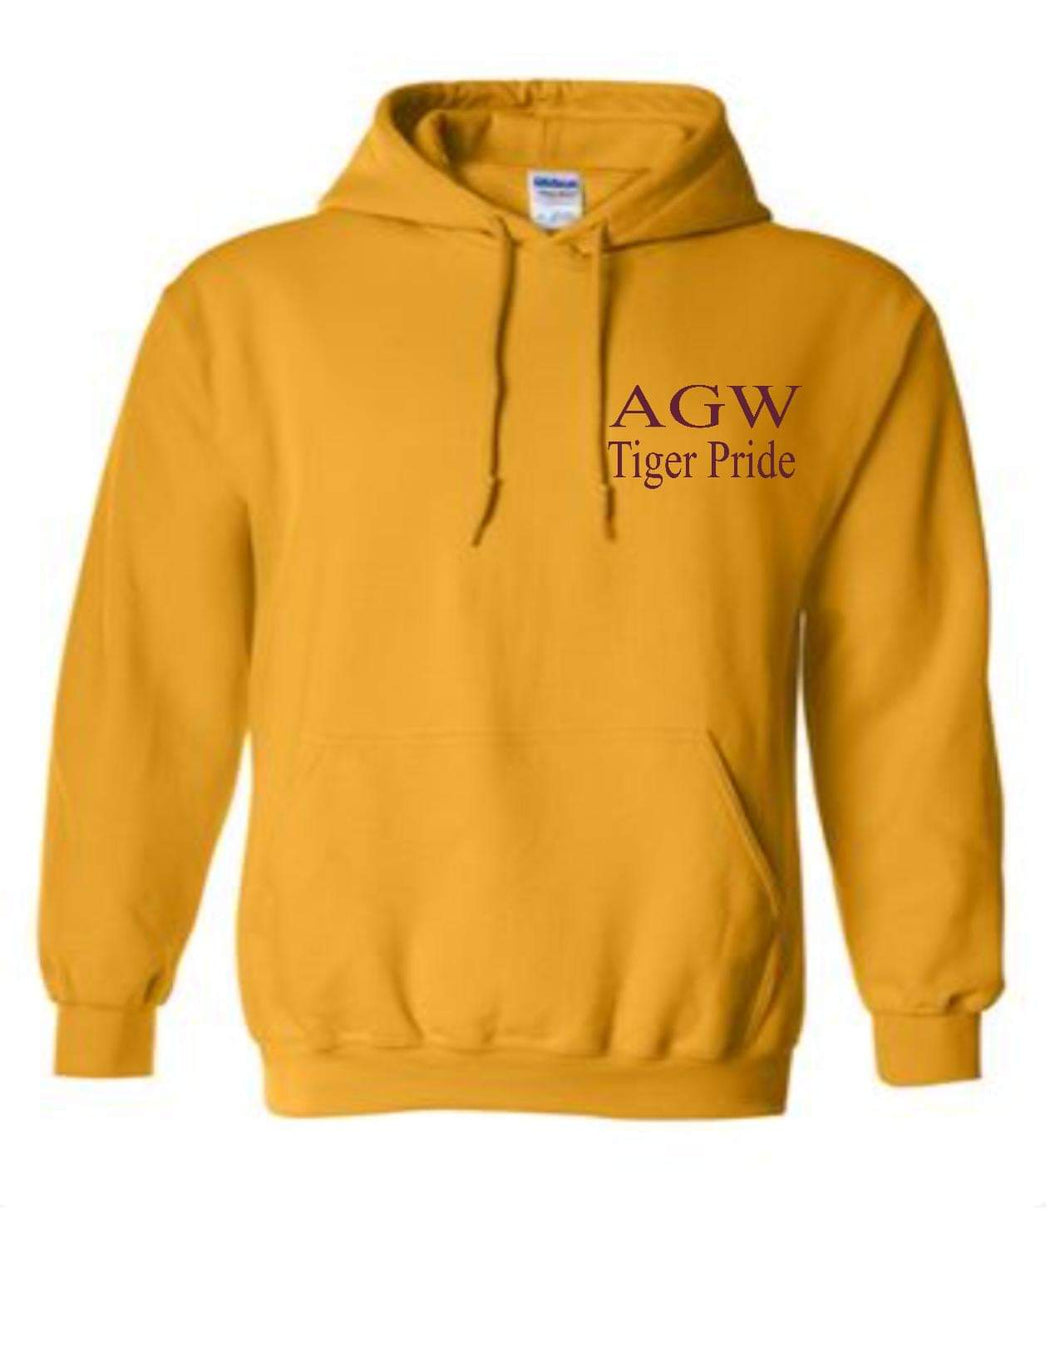 Yellow Gold Hoodie with AGWTP embroidery in yellow gold thread